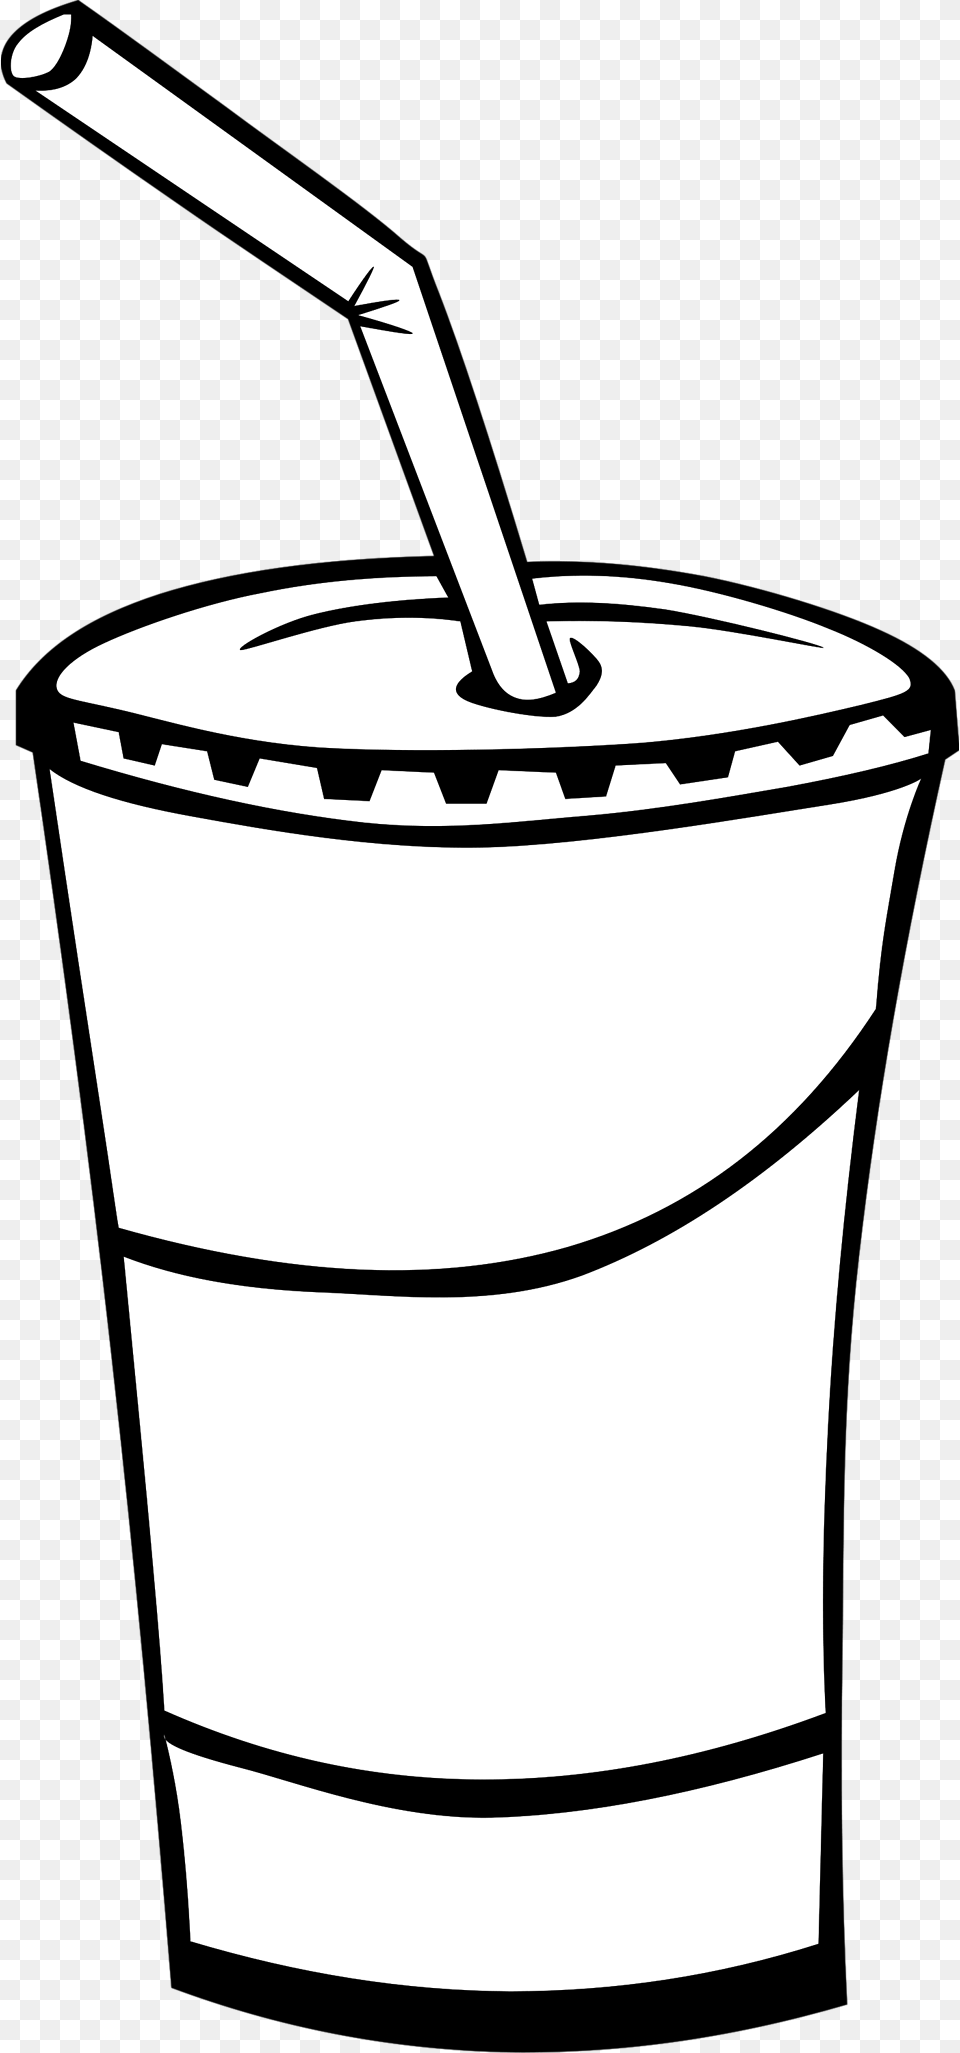 Cup Stock Photo Illustration Of A Soda Cup, Beverage, Milk, Dairy, Food Png Image